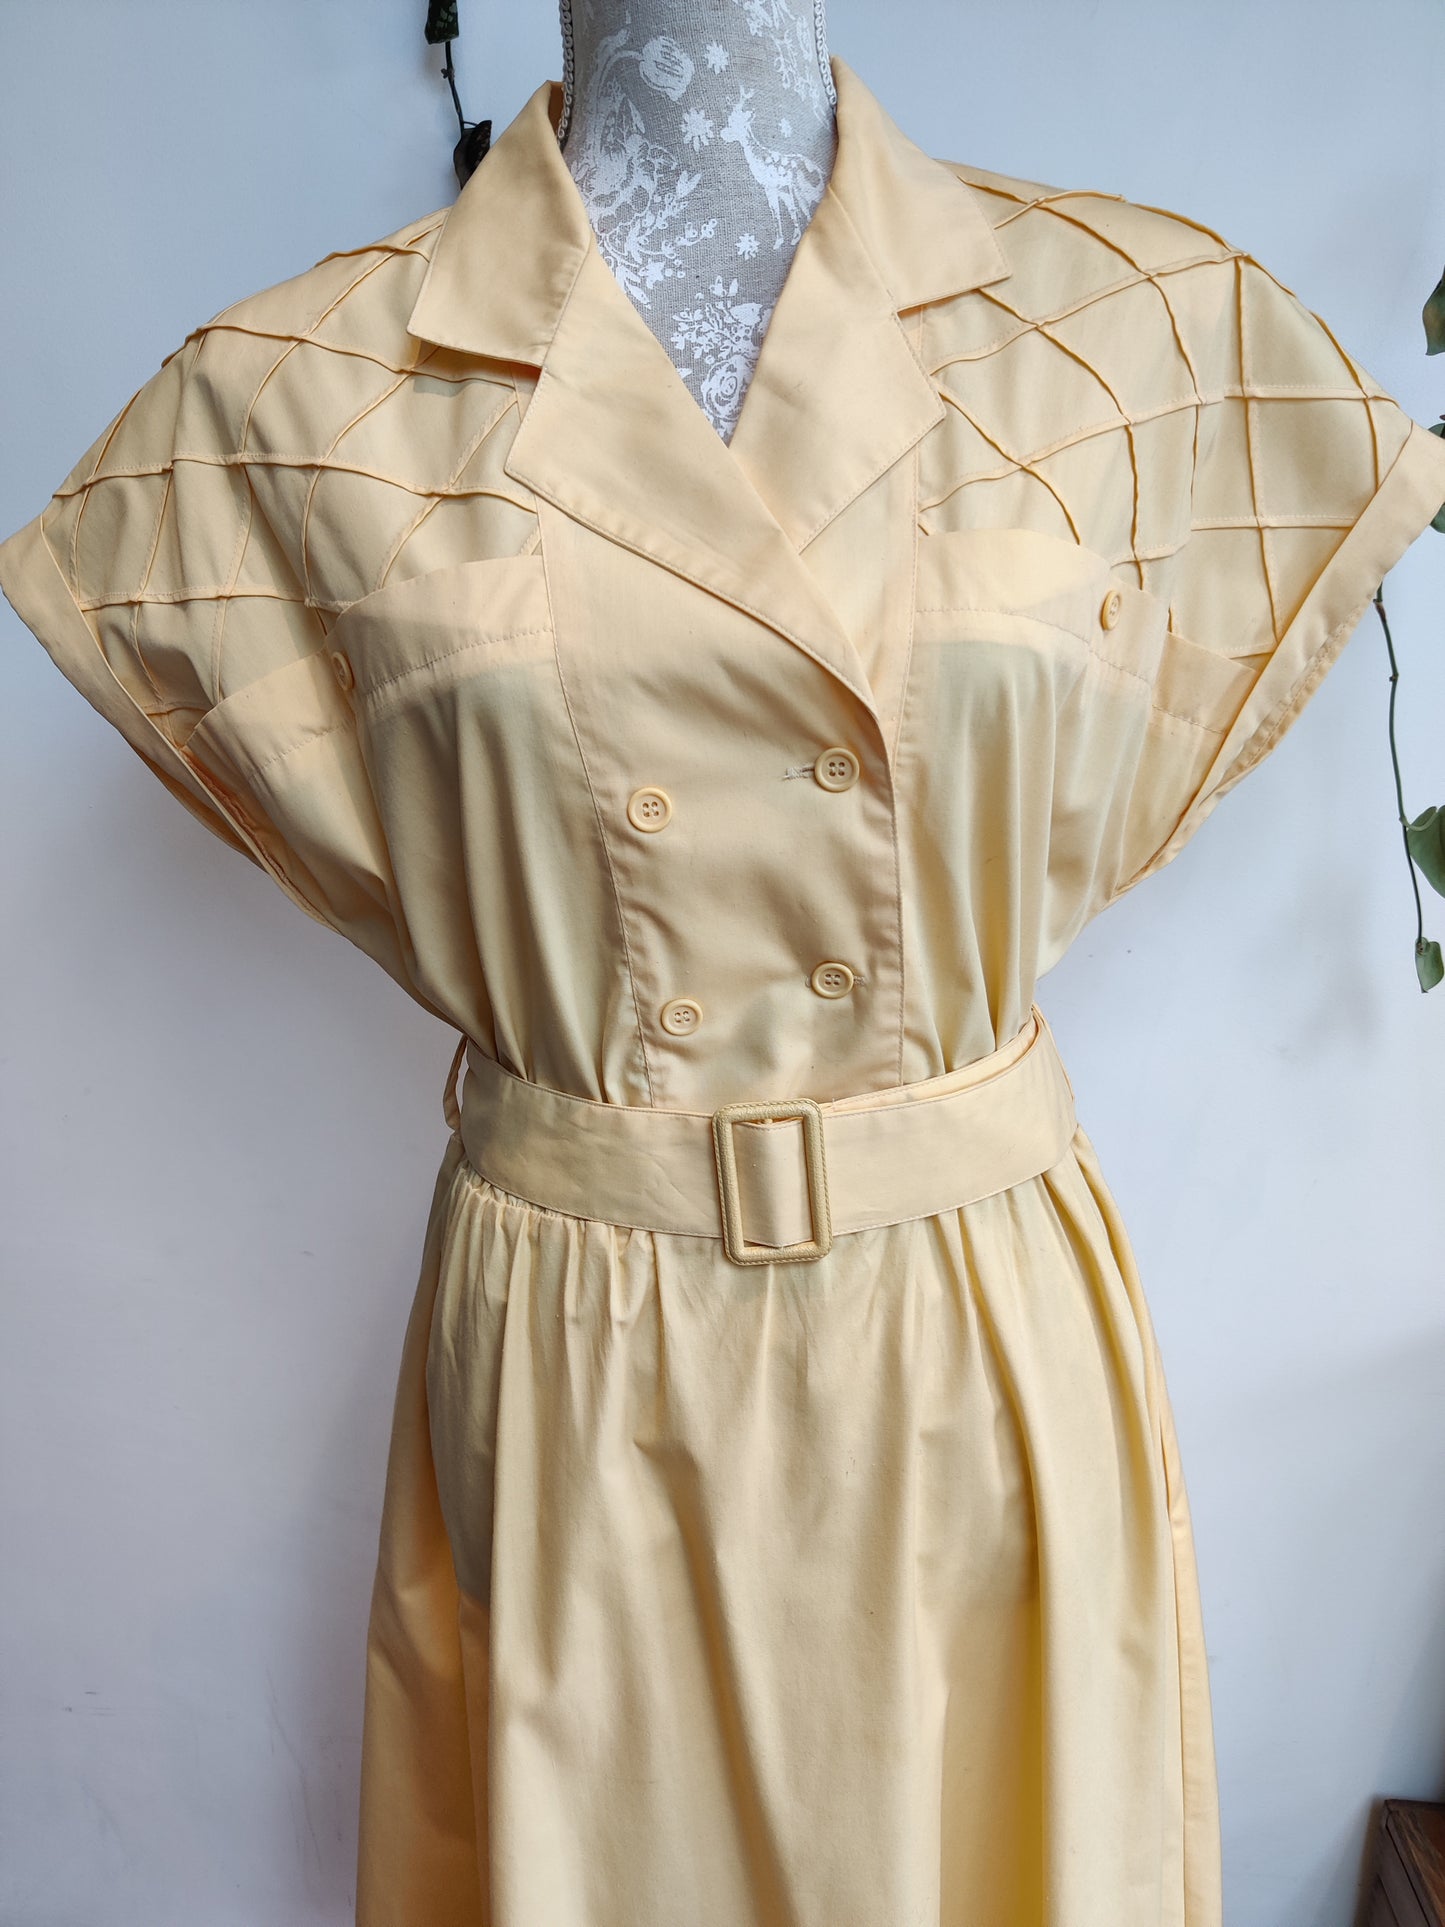 Stunning 80s yellow midi dress with button detail. Size 14-16